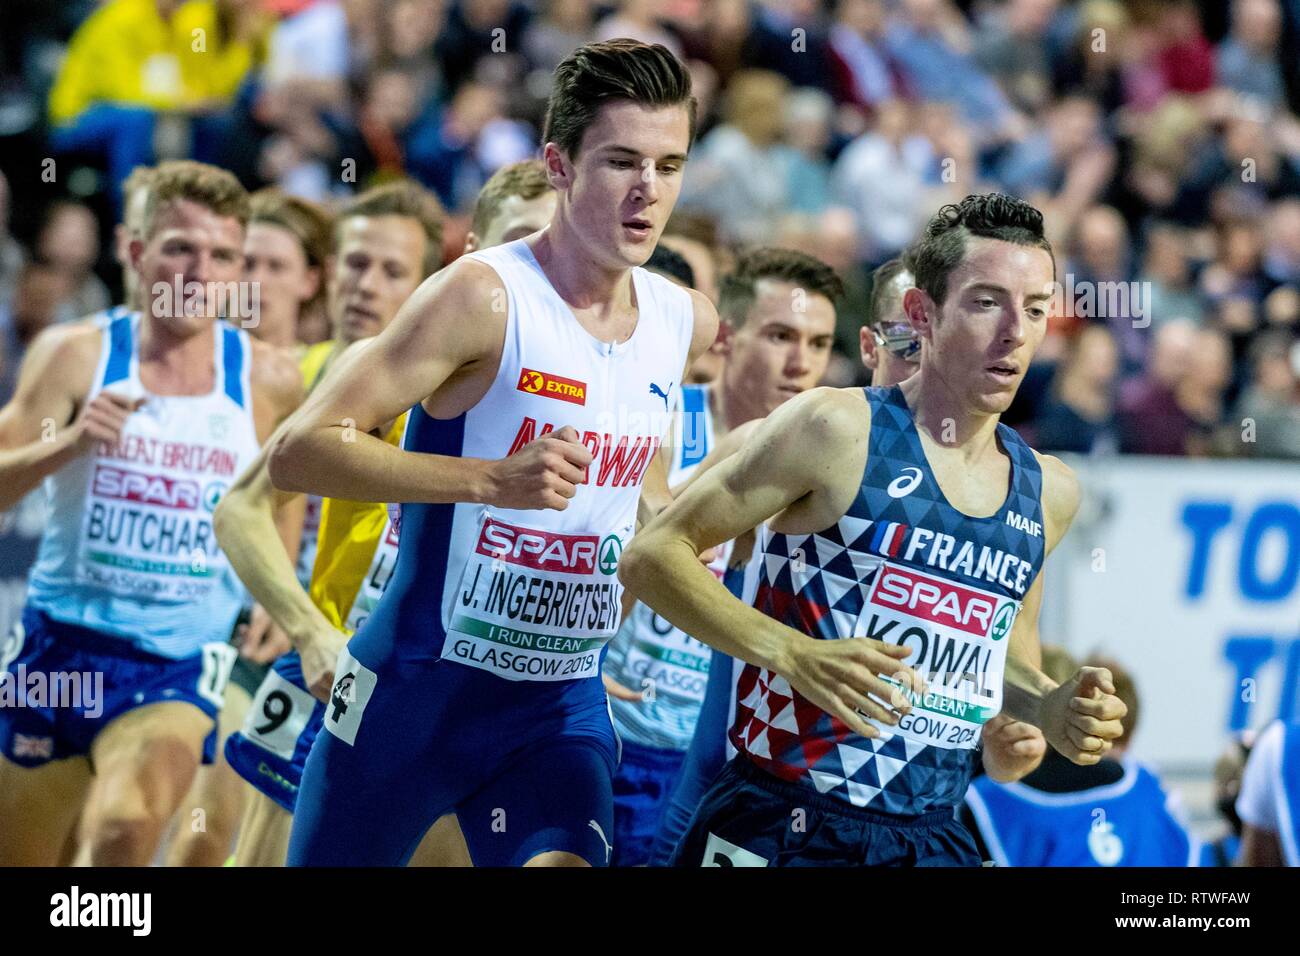 Glasgow, Scotland, UK. 2nd March, 2019. KOWAL Yoann FRA and INGEBRIGTSEN Jakob NOR competing in the 3000m Men Final event during day TWO of the European Athletics Indoor Championships 2019 at Emirates Arena  in Glasgow, Scotland, United Kingdom. 2.03.2019 Credit: Cronos/Alamy Live News Stock Photo